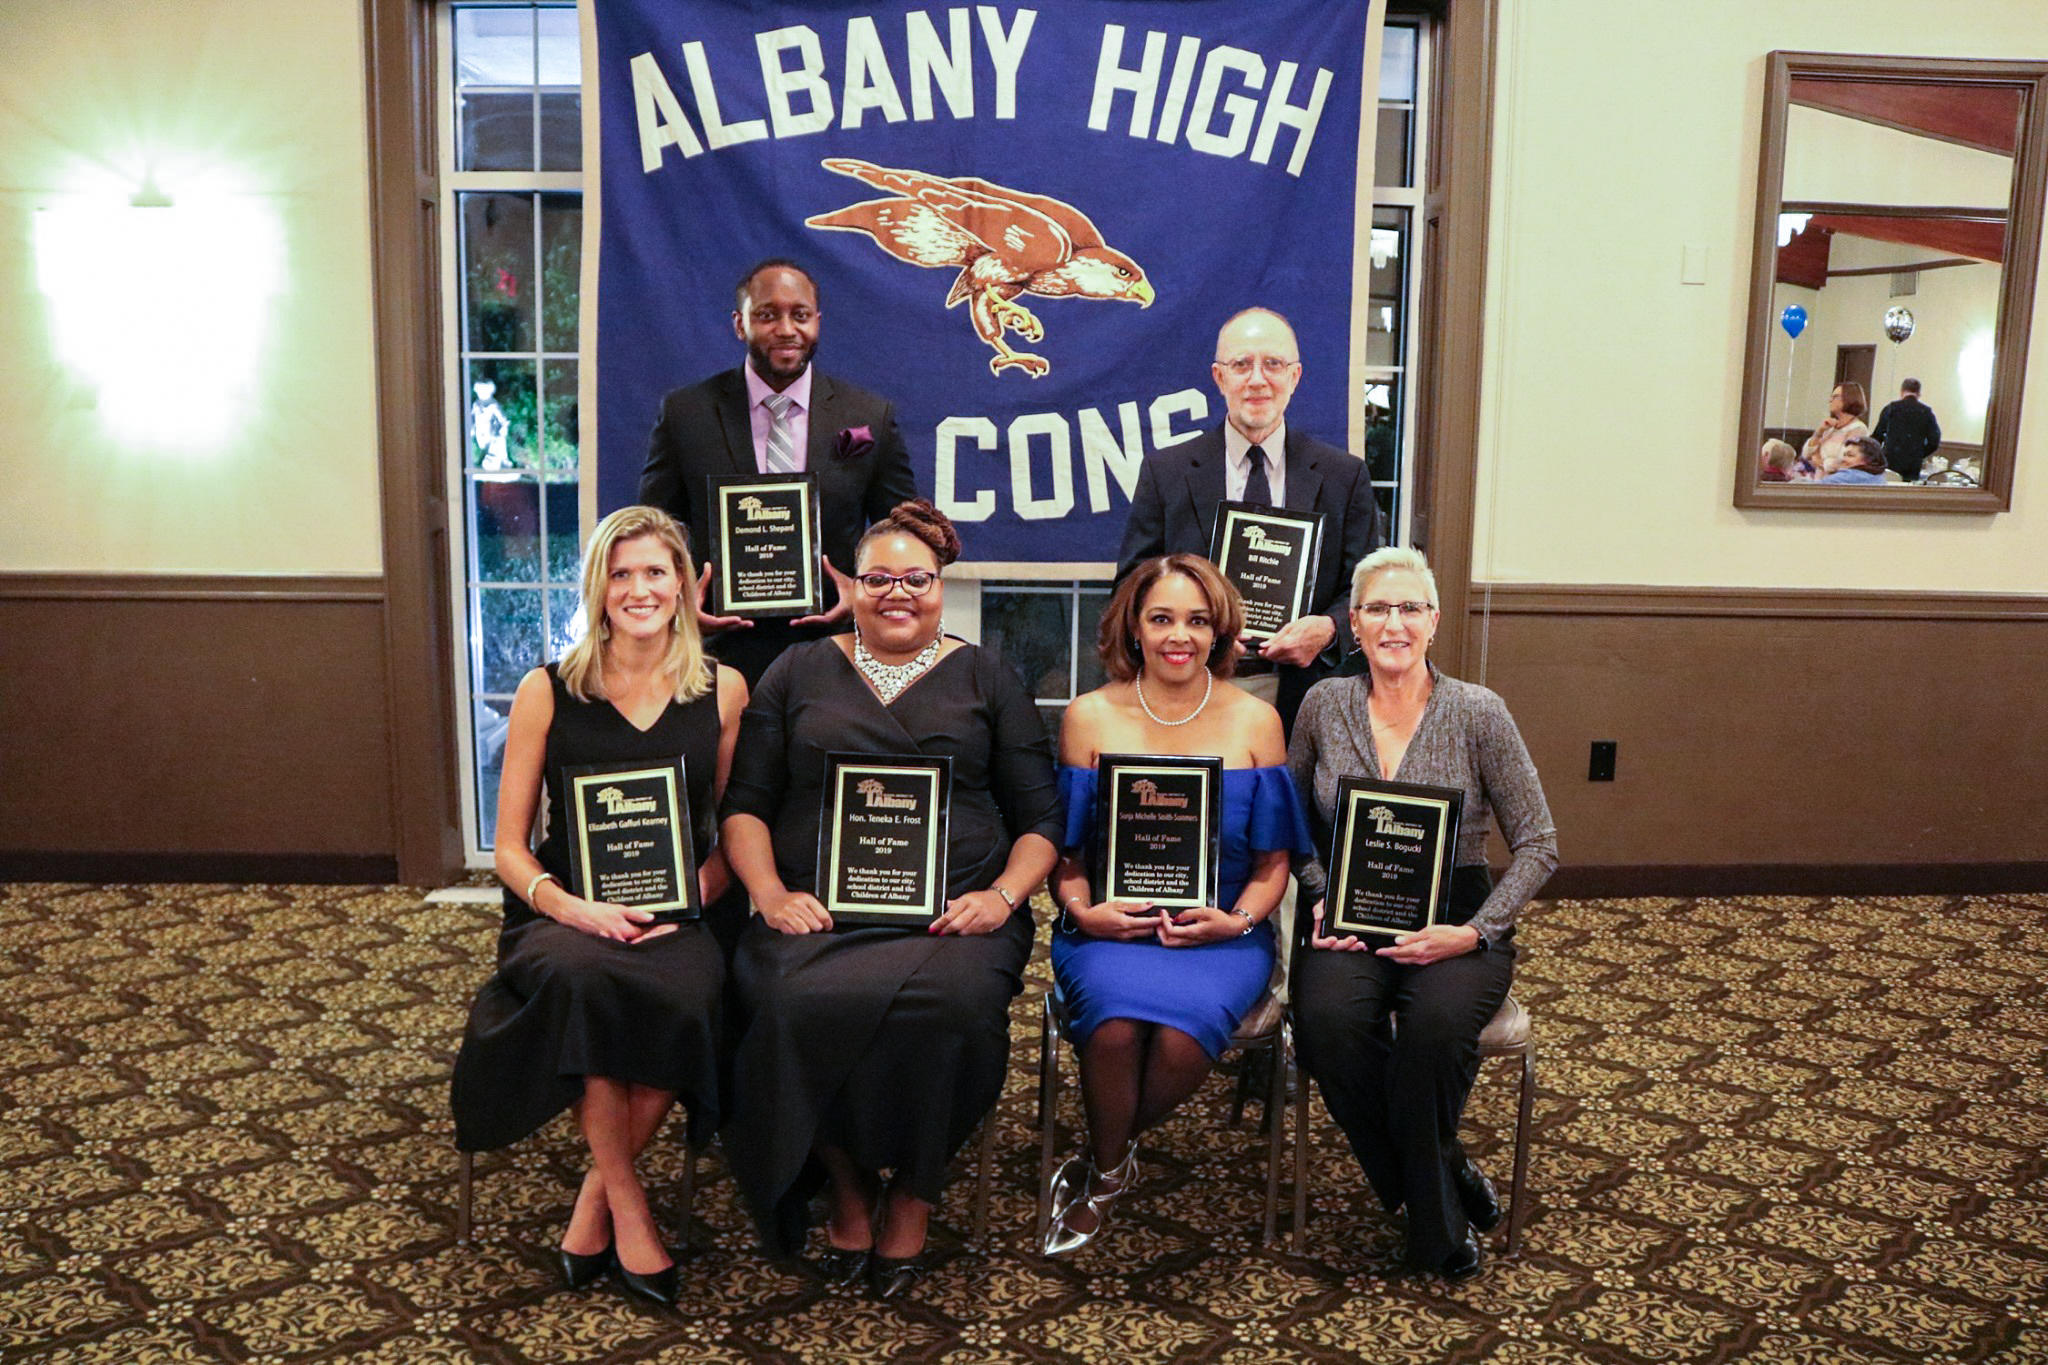 City School District of 33Ƶ's Hall of Fame Class of 2019